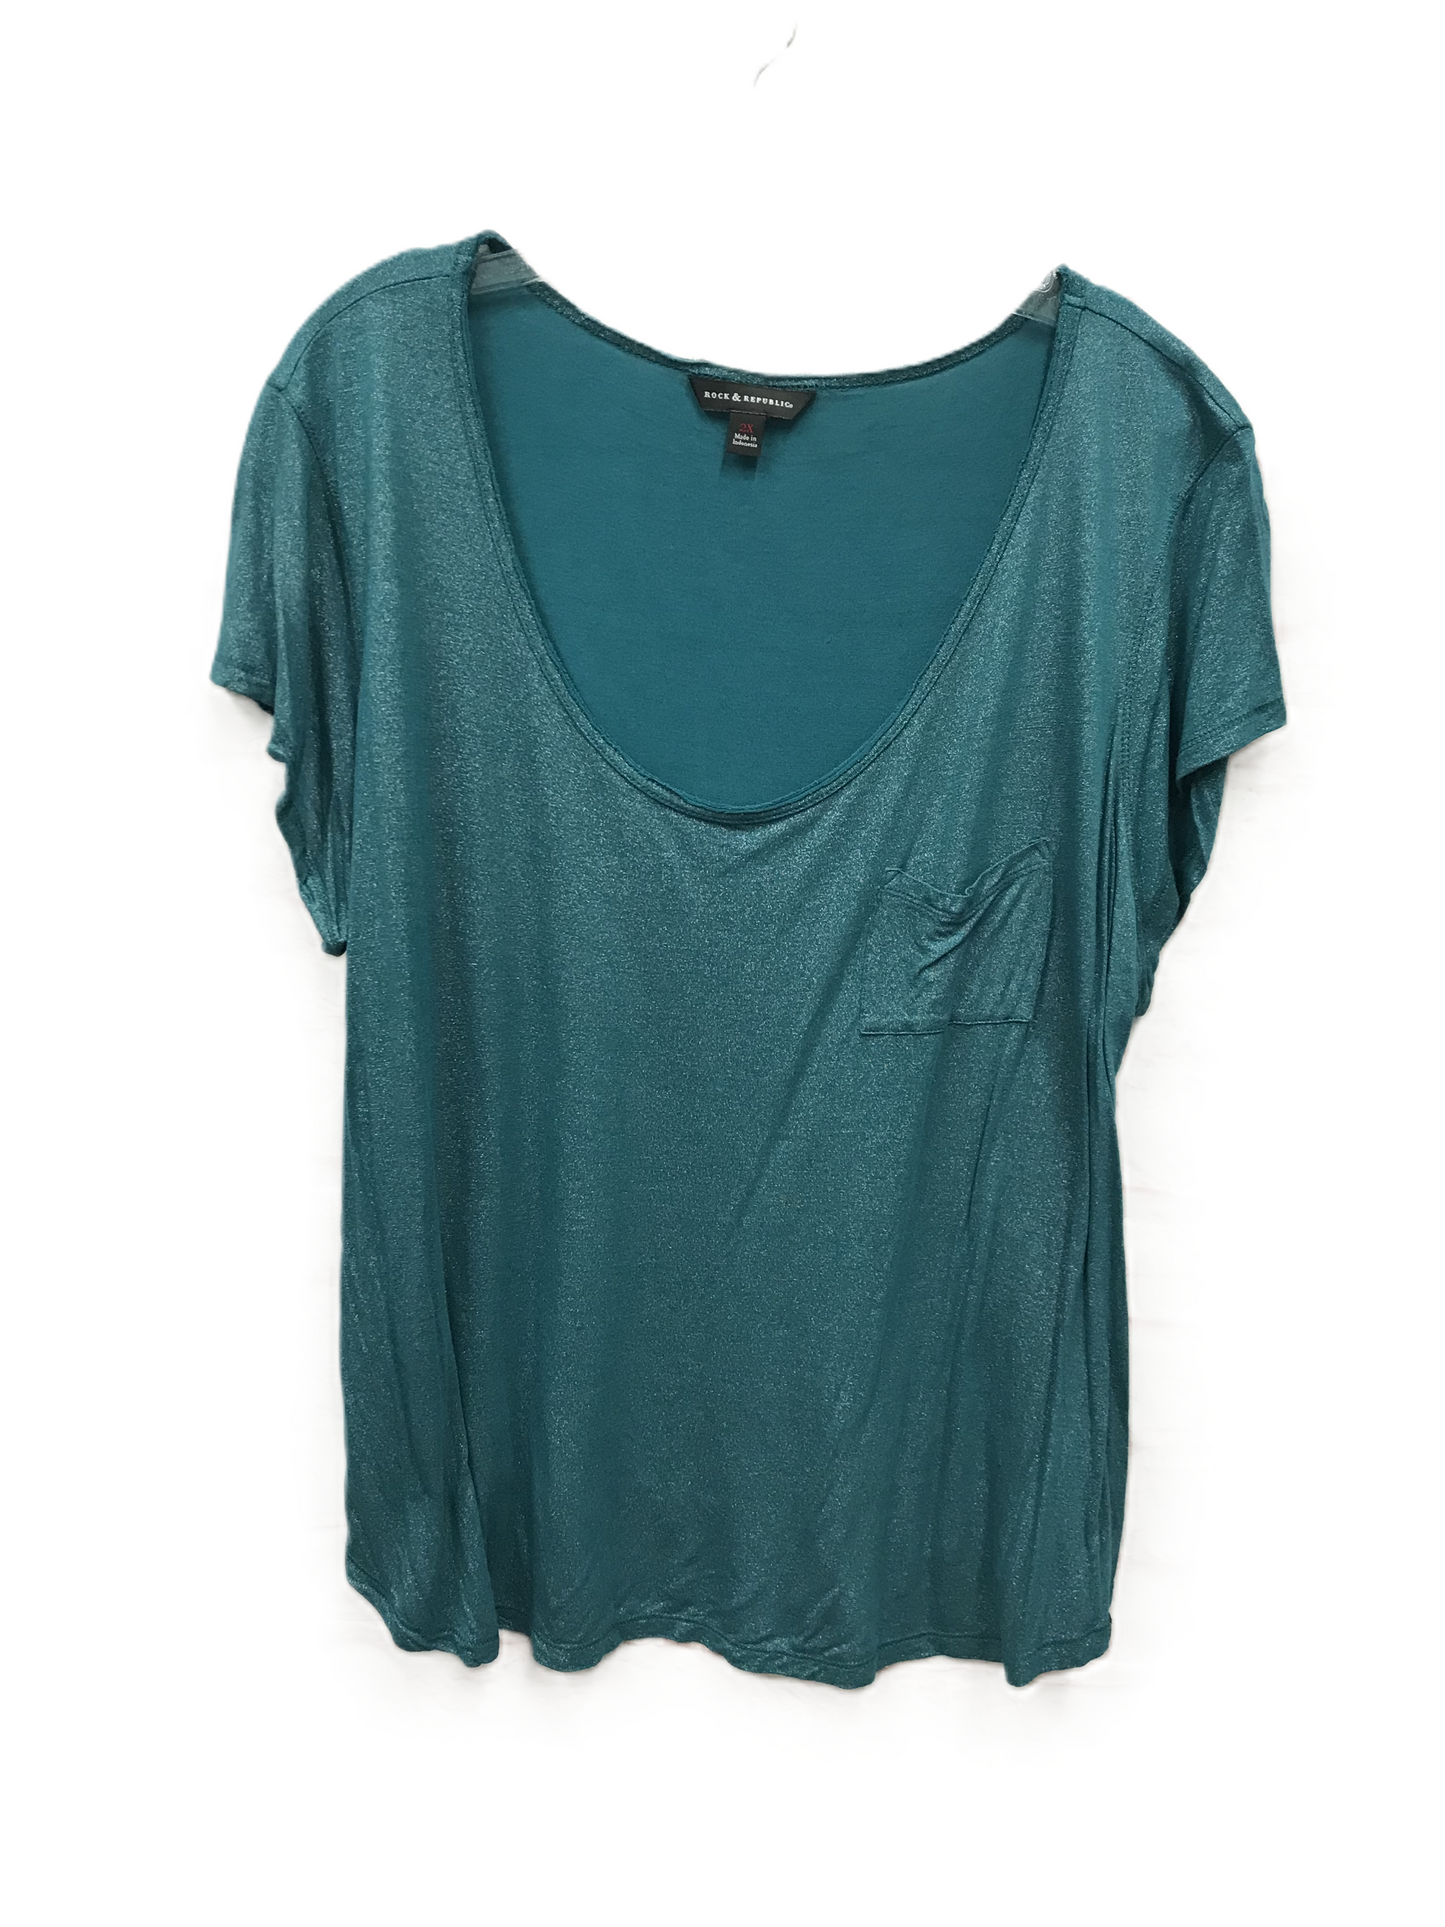 Teal Top Short Sleeve Basic By Rock And Republic, Size: 2x